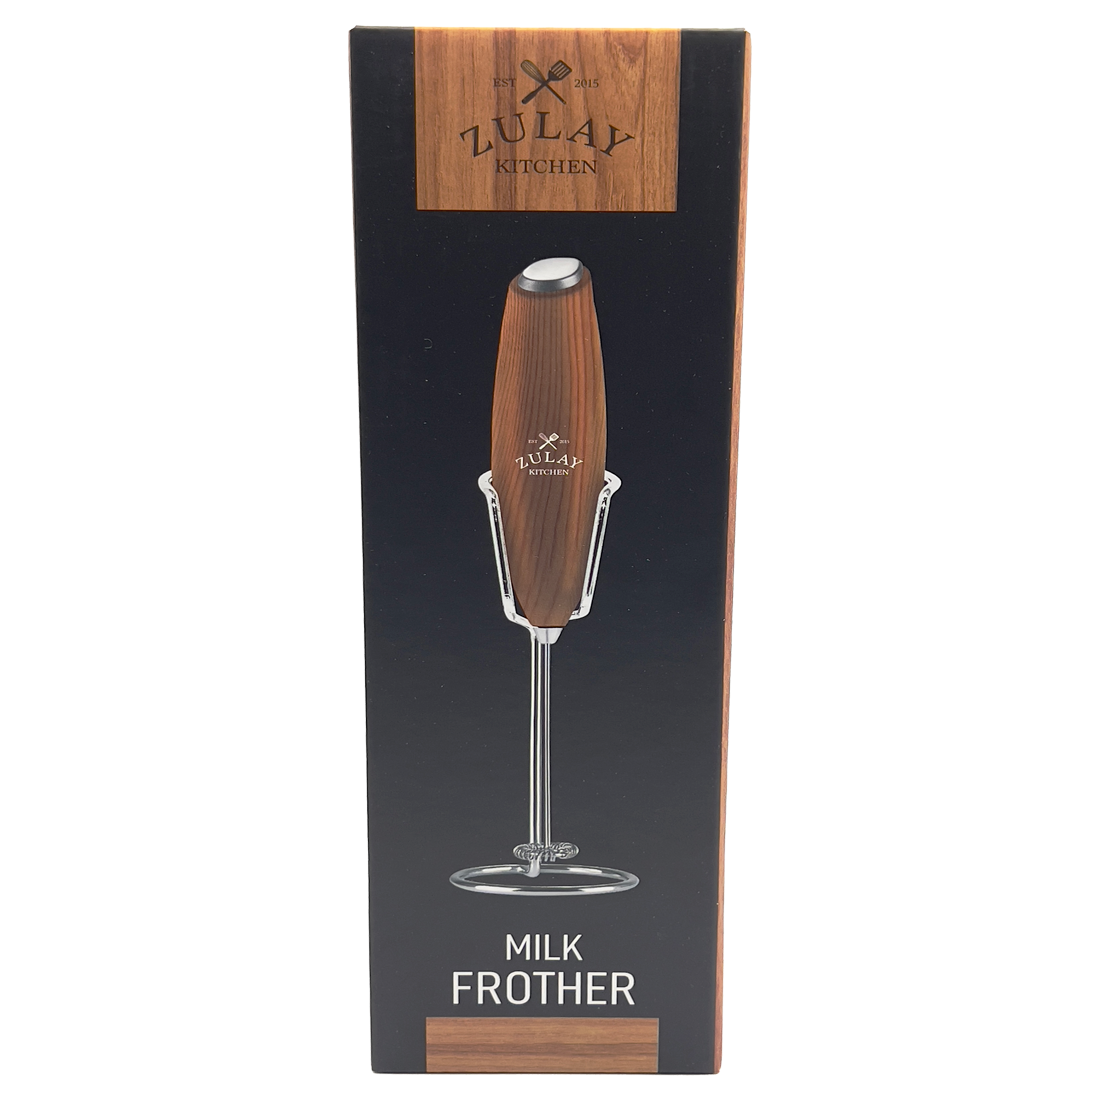 Milk Boss Handheld Frother  Milk frother, Frother, Handheld frother